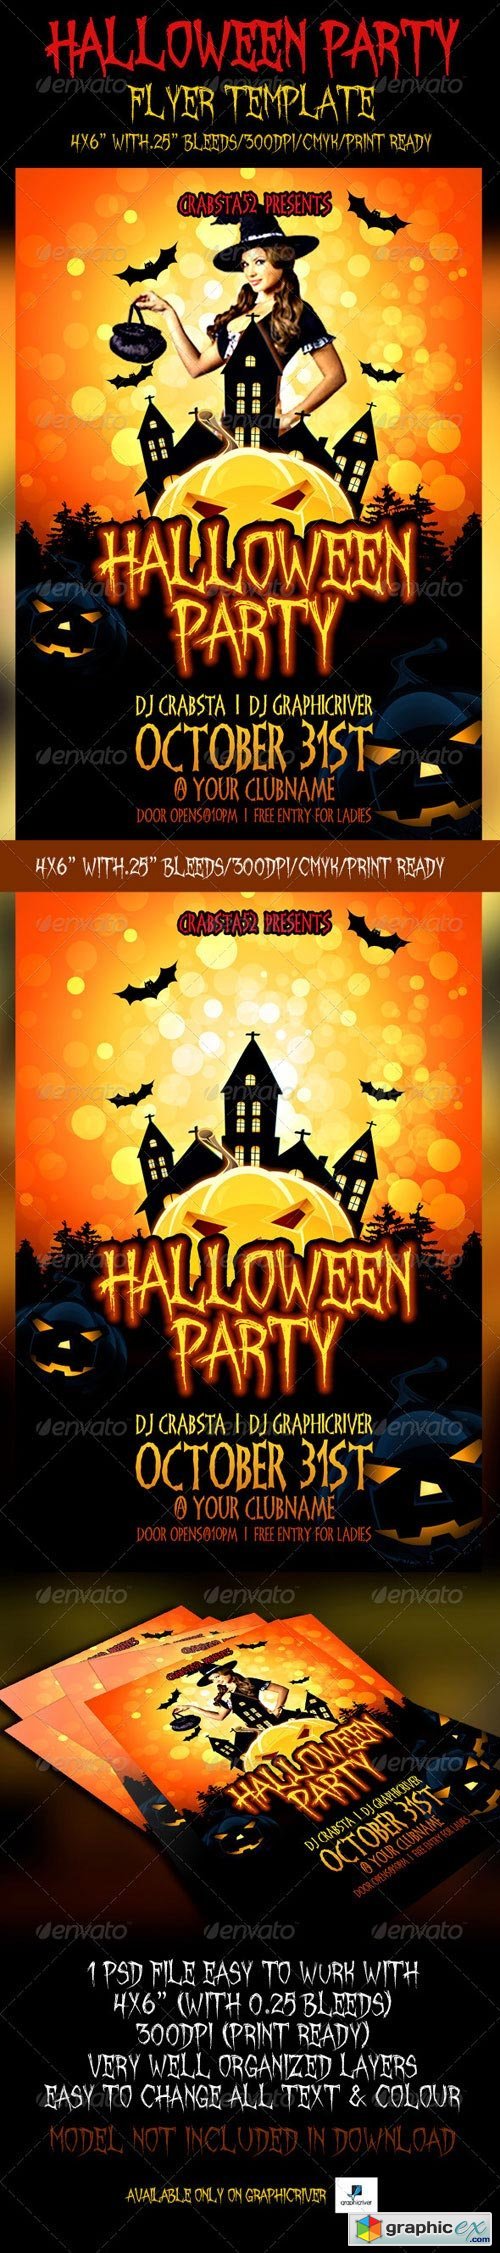 Halloween Party Flyer Template 5341657